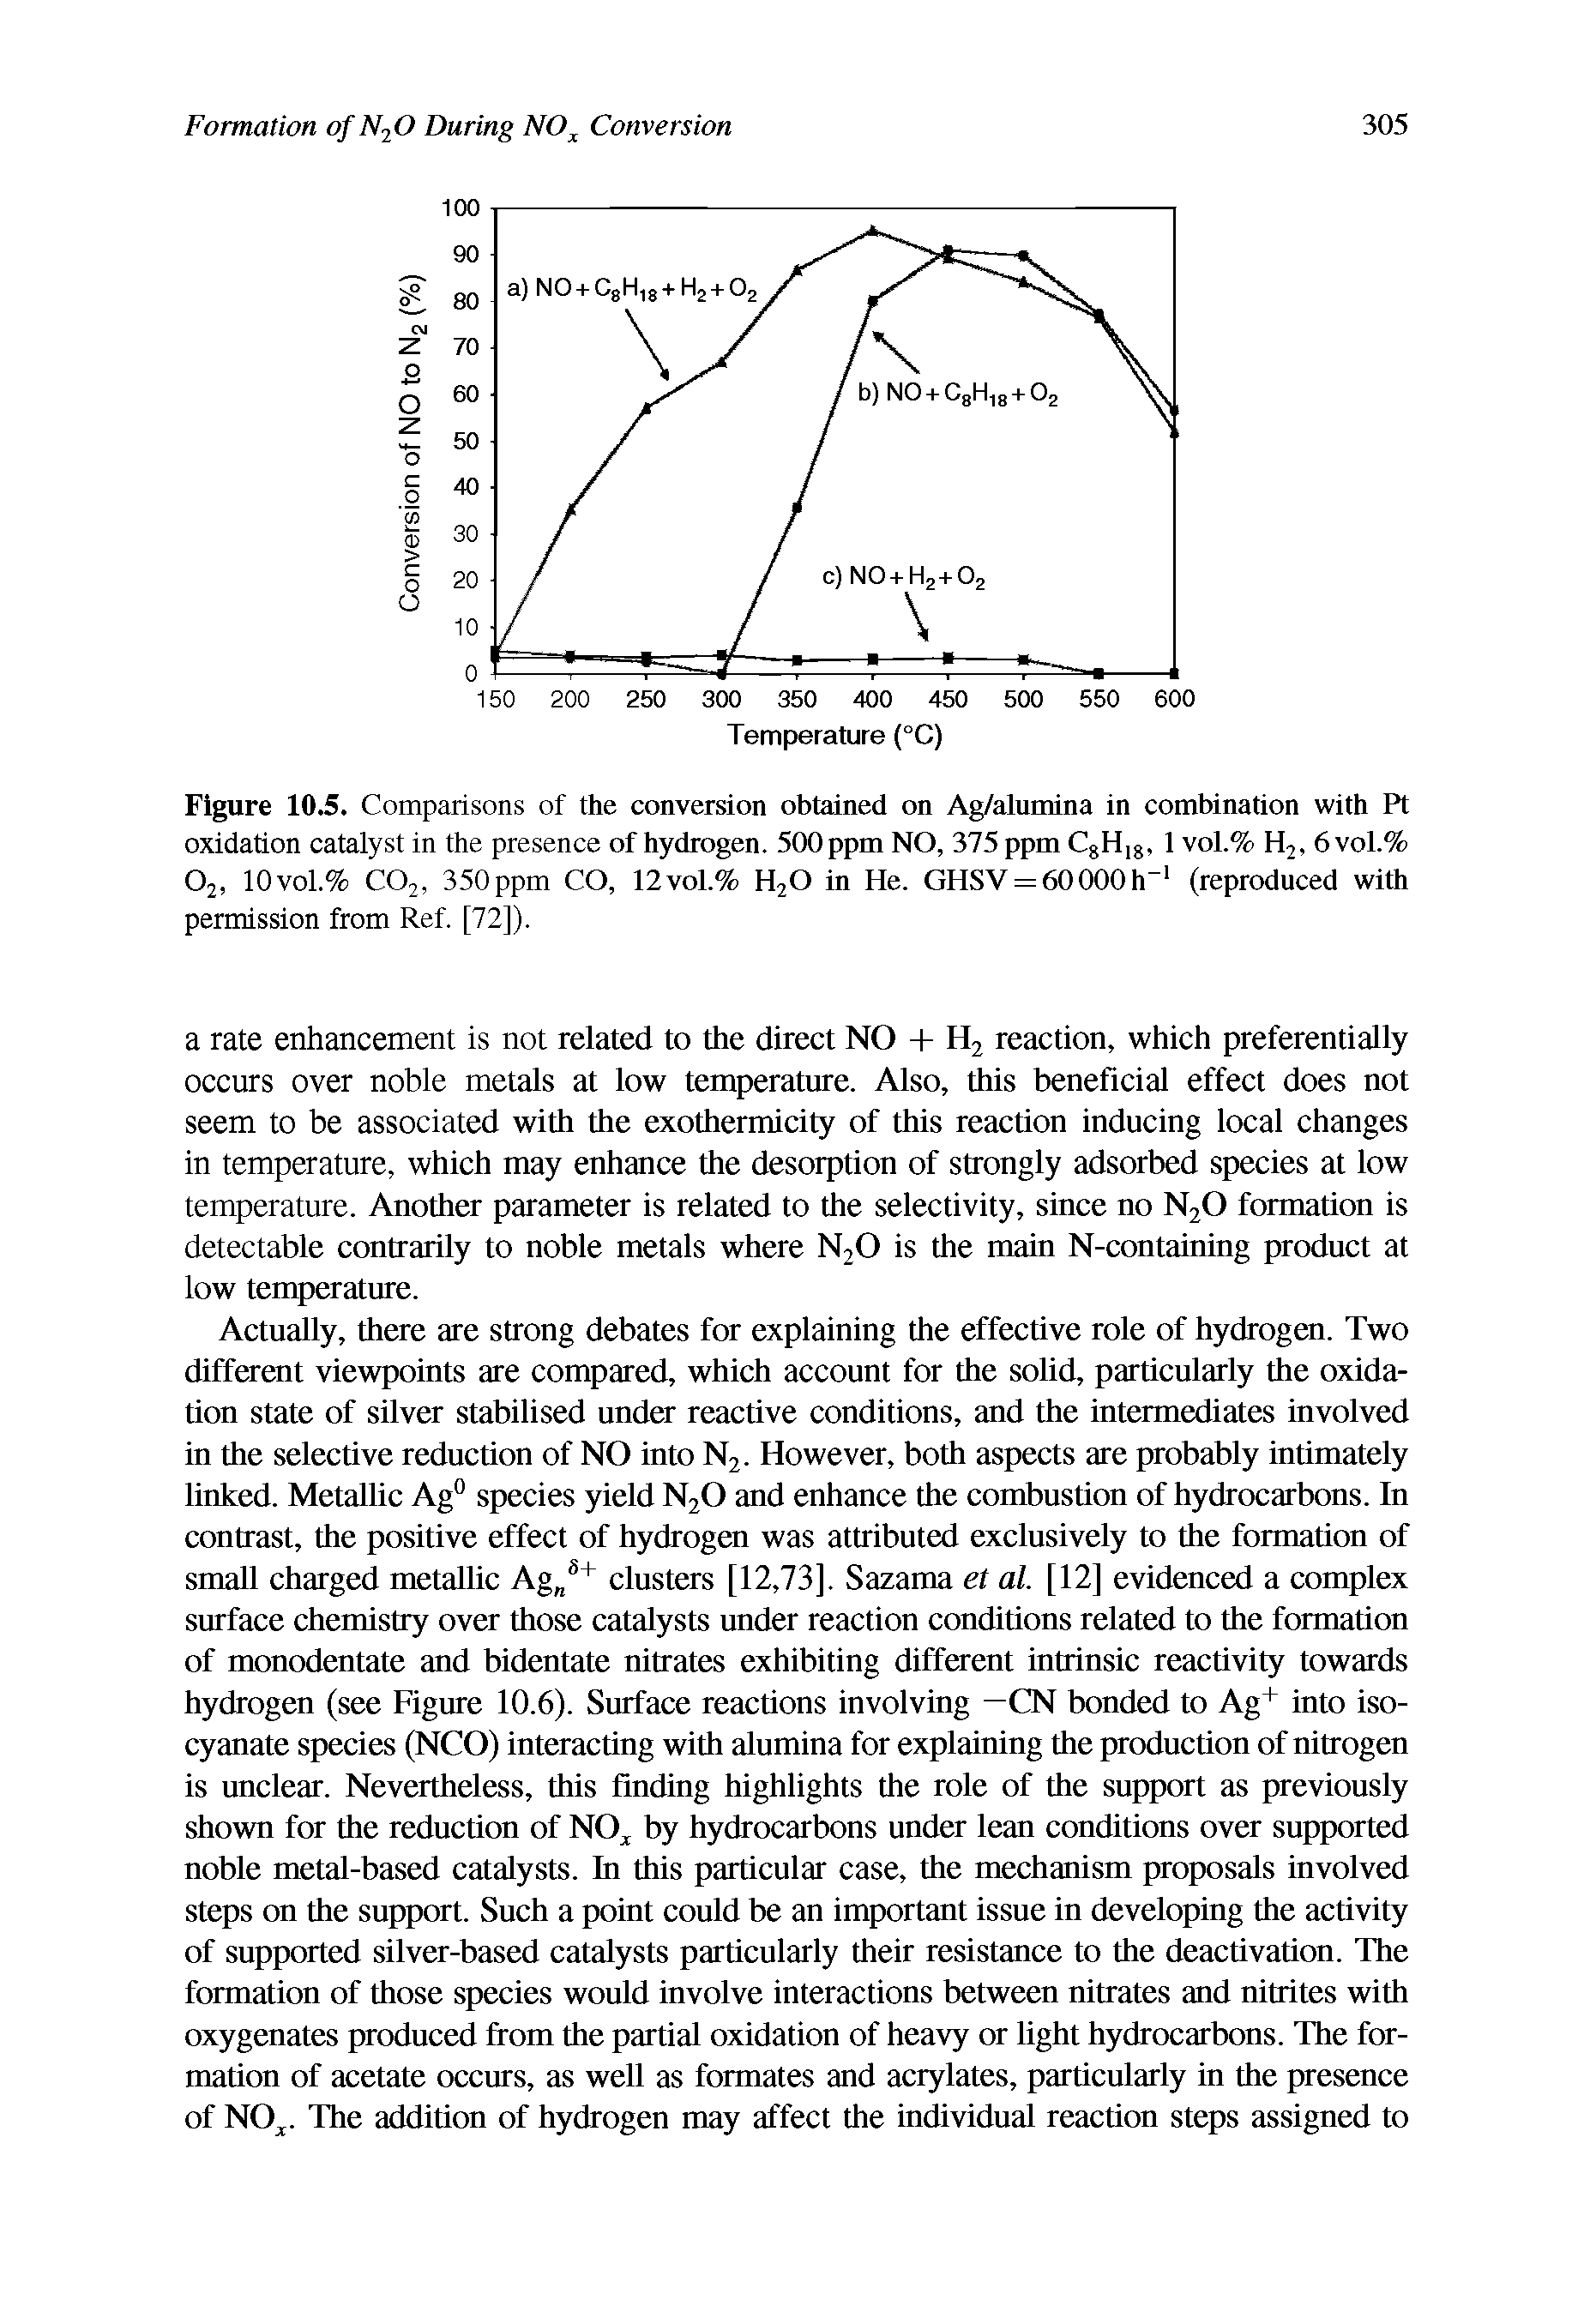 Figure 10.5. Comparisons of the conversion obtained on Ag/alumina in combination with Pt oxidation catalyst in the presence of hydrogen. 500 ppm NO, 375 ppm C8H18, 1 vol.% H2, 6 vol.% 02, 10vol.% C02, 350ppm CO, 12vol.% H20 in He. GHSV = 60000h 1 (reproduced with permission from Ref. [72]).